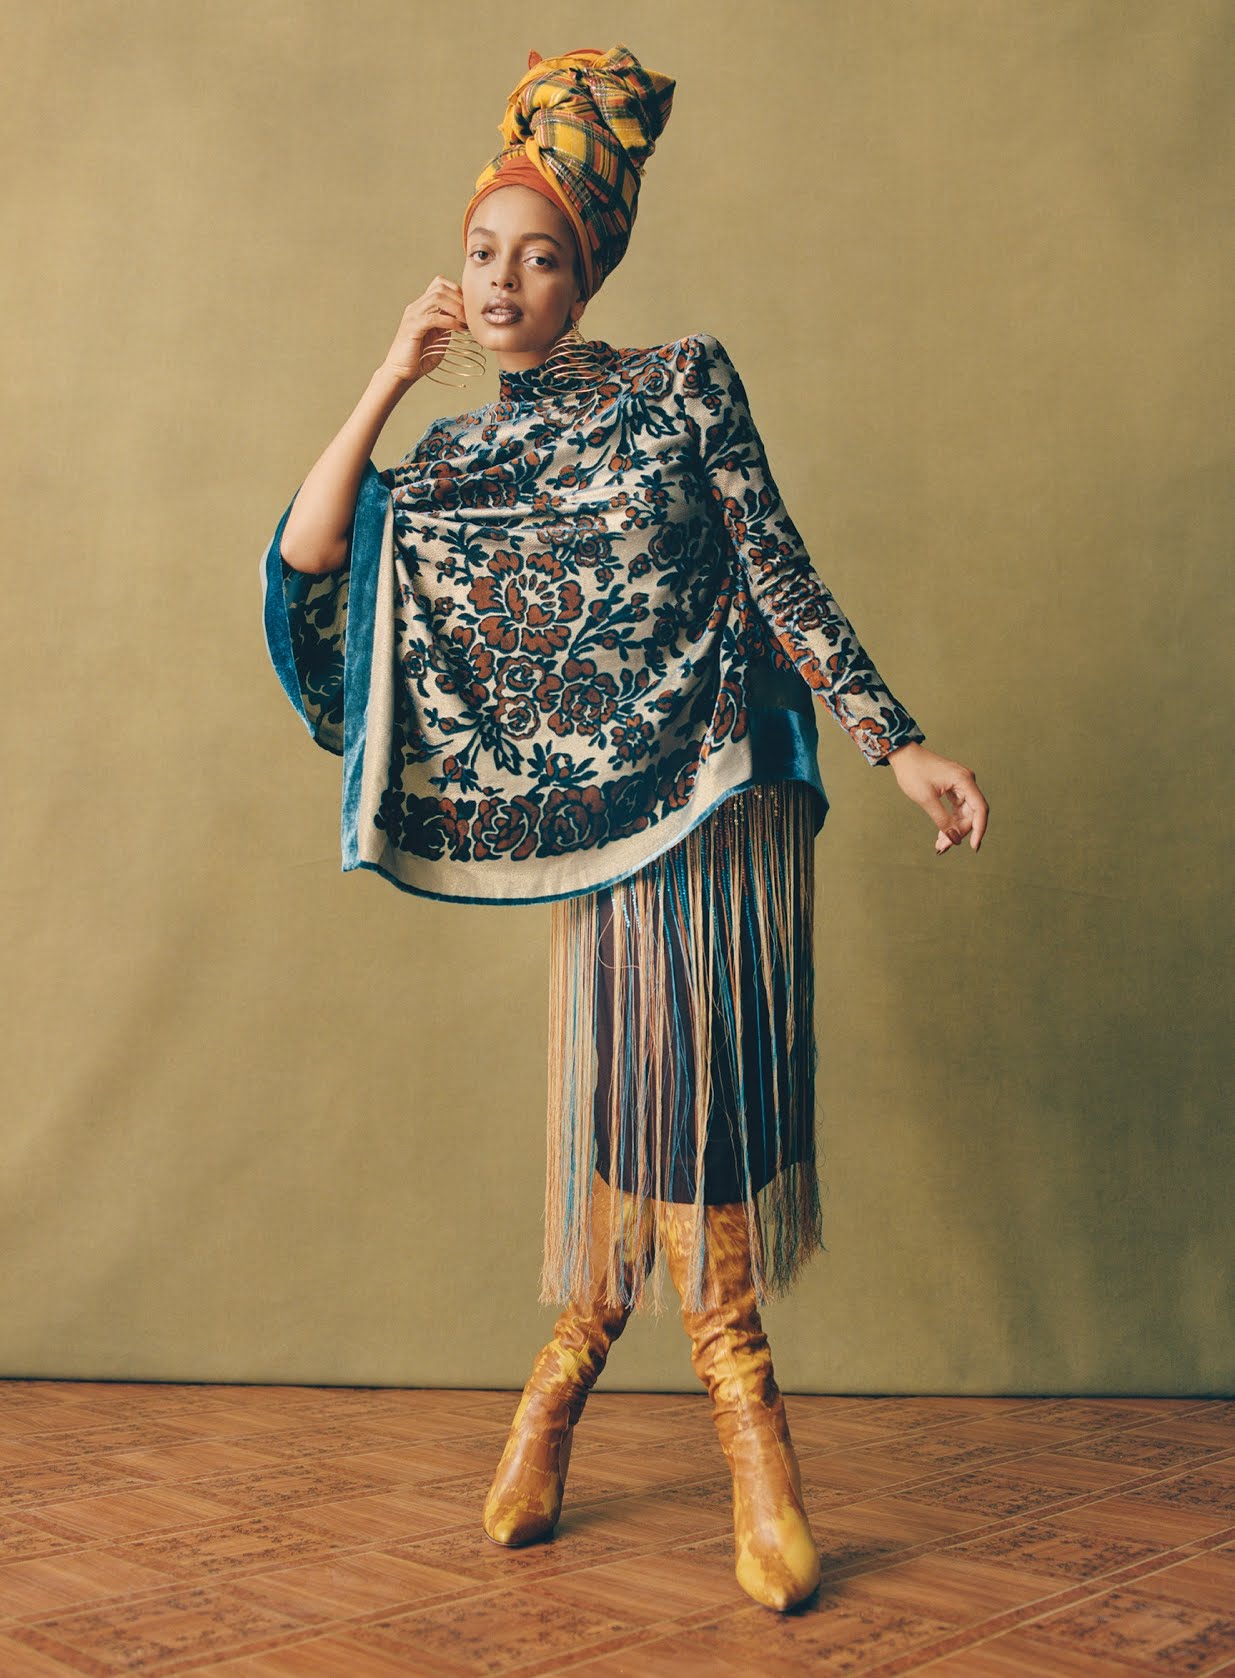 Black Lifestyle: A Photoshoot Dedicated to the Style of the Aunties